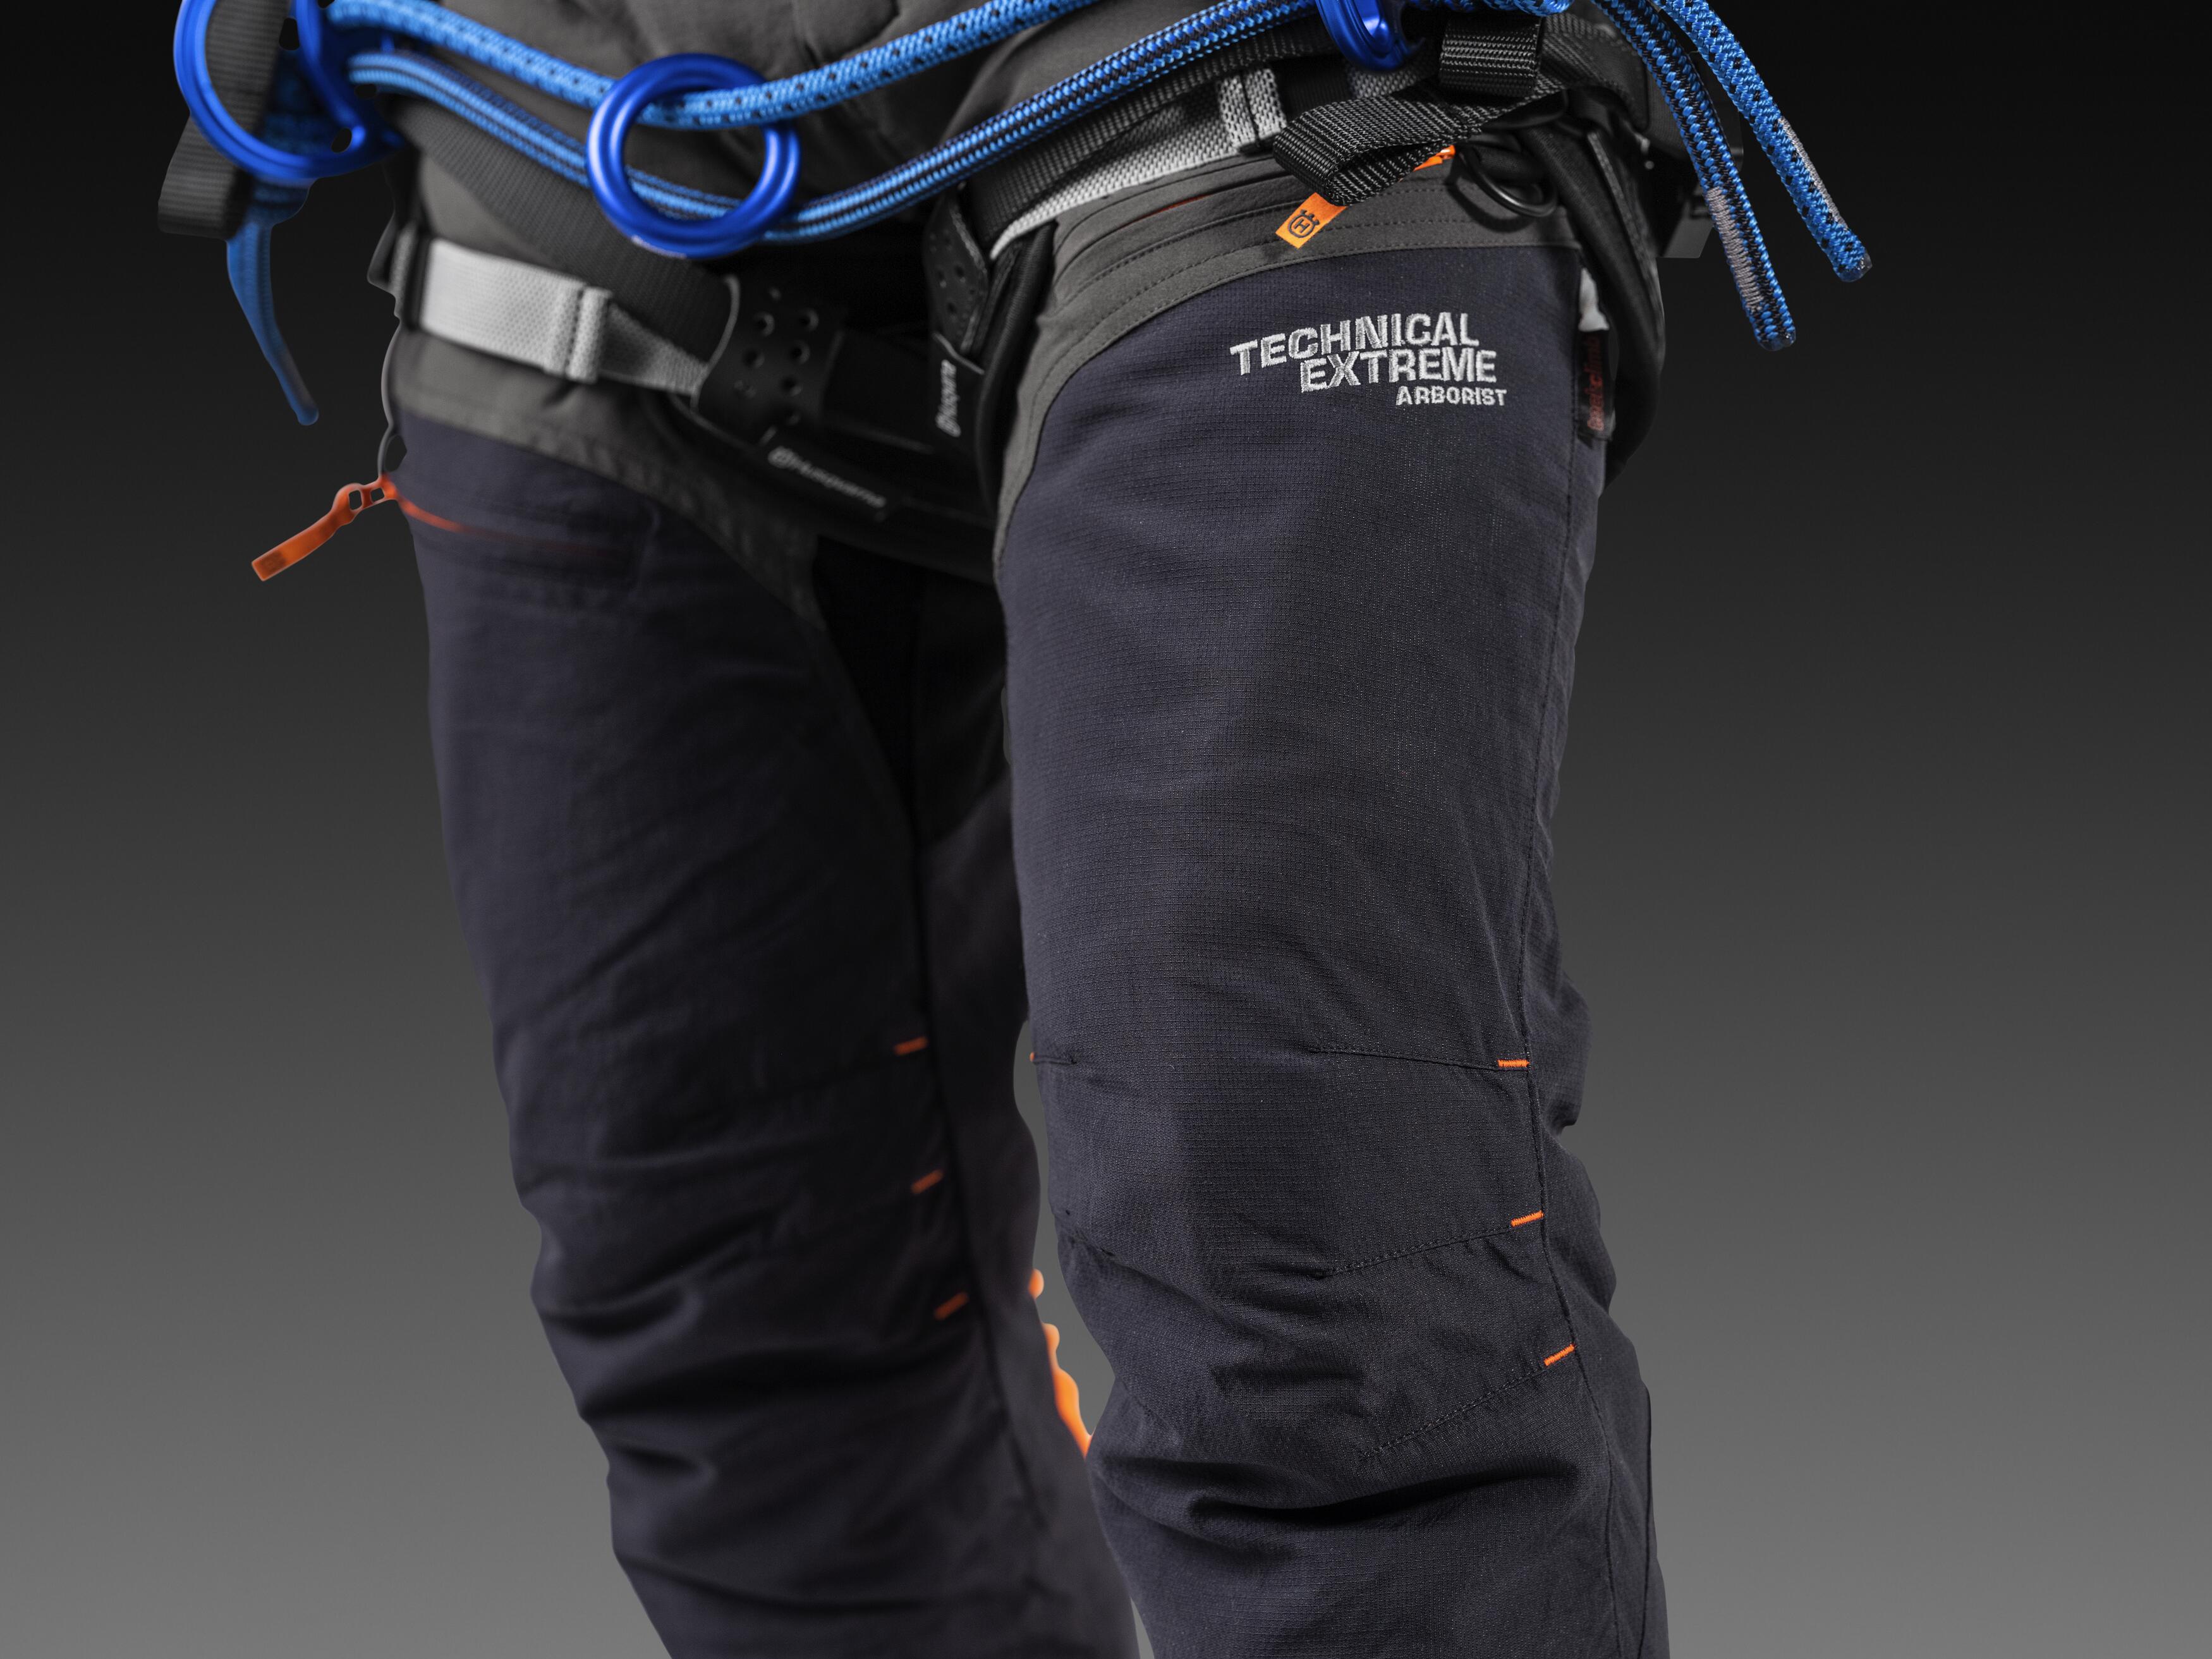 Durable and lightweight reinforcements, Technical Extreme Arborist trousers